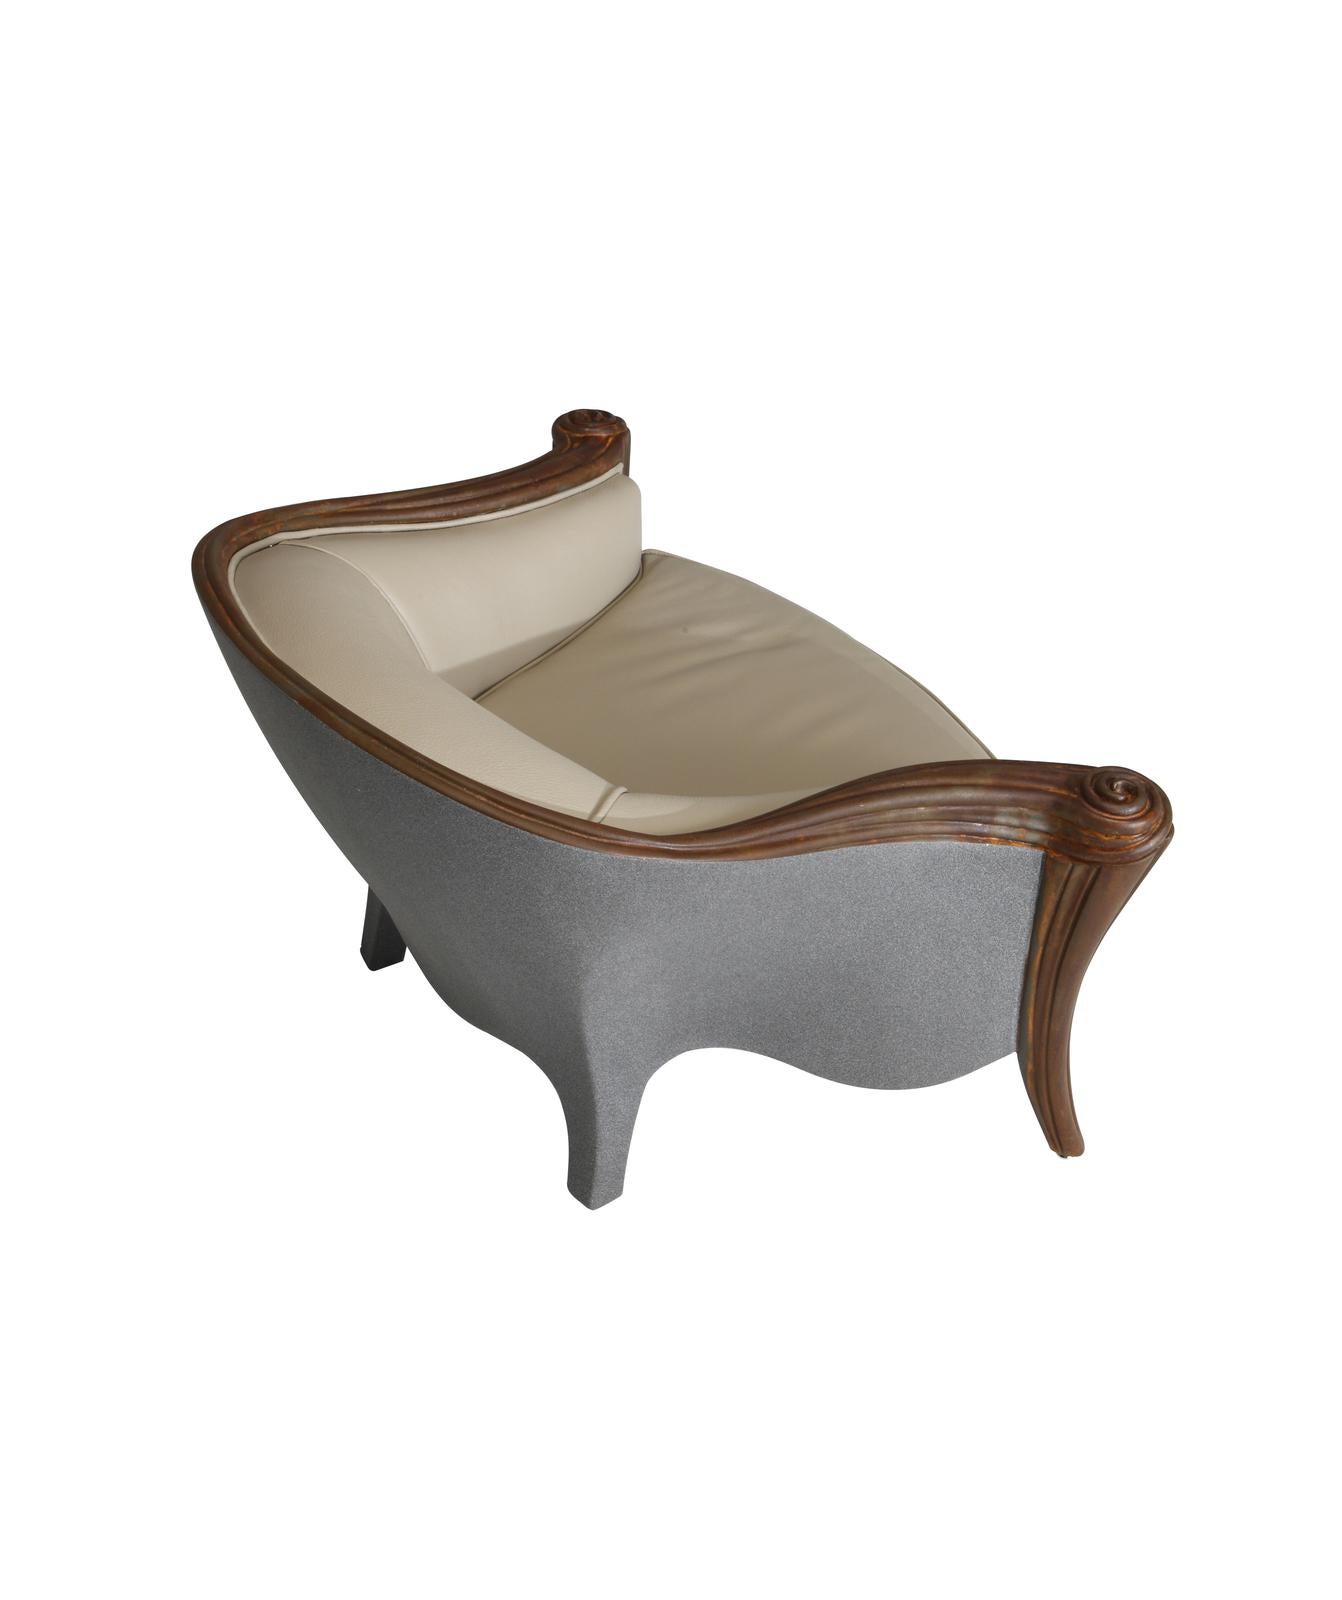 This elegant armchair, designed for children or pets, evokes the glamour of the Classic tub-bergère style, reinterpreted using modern materials. The wooden frame features exquisitely carved front legs with a brown Corten finish that extend into the